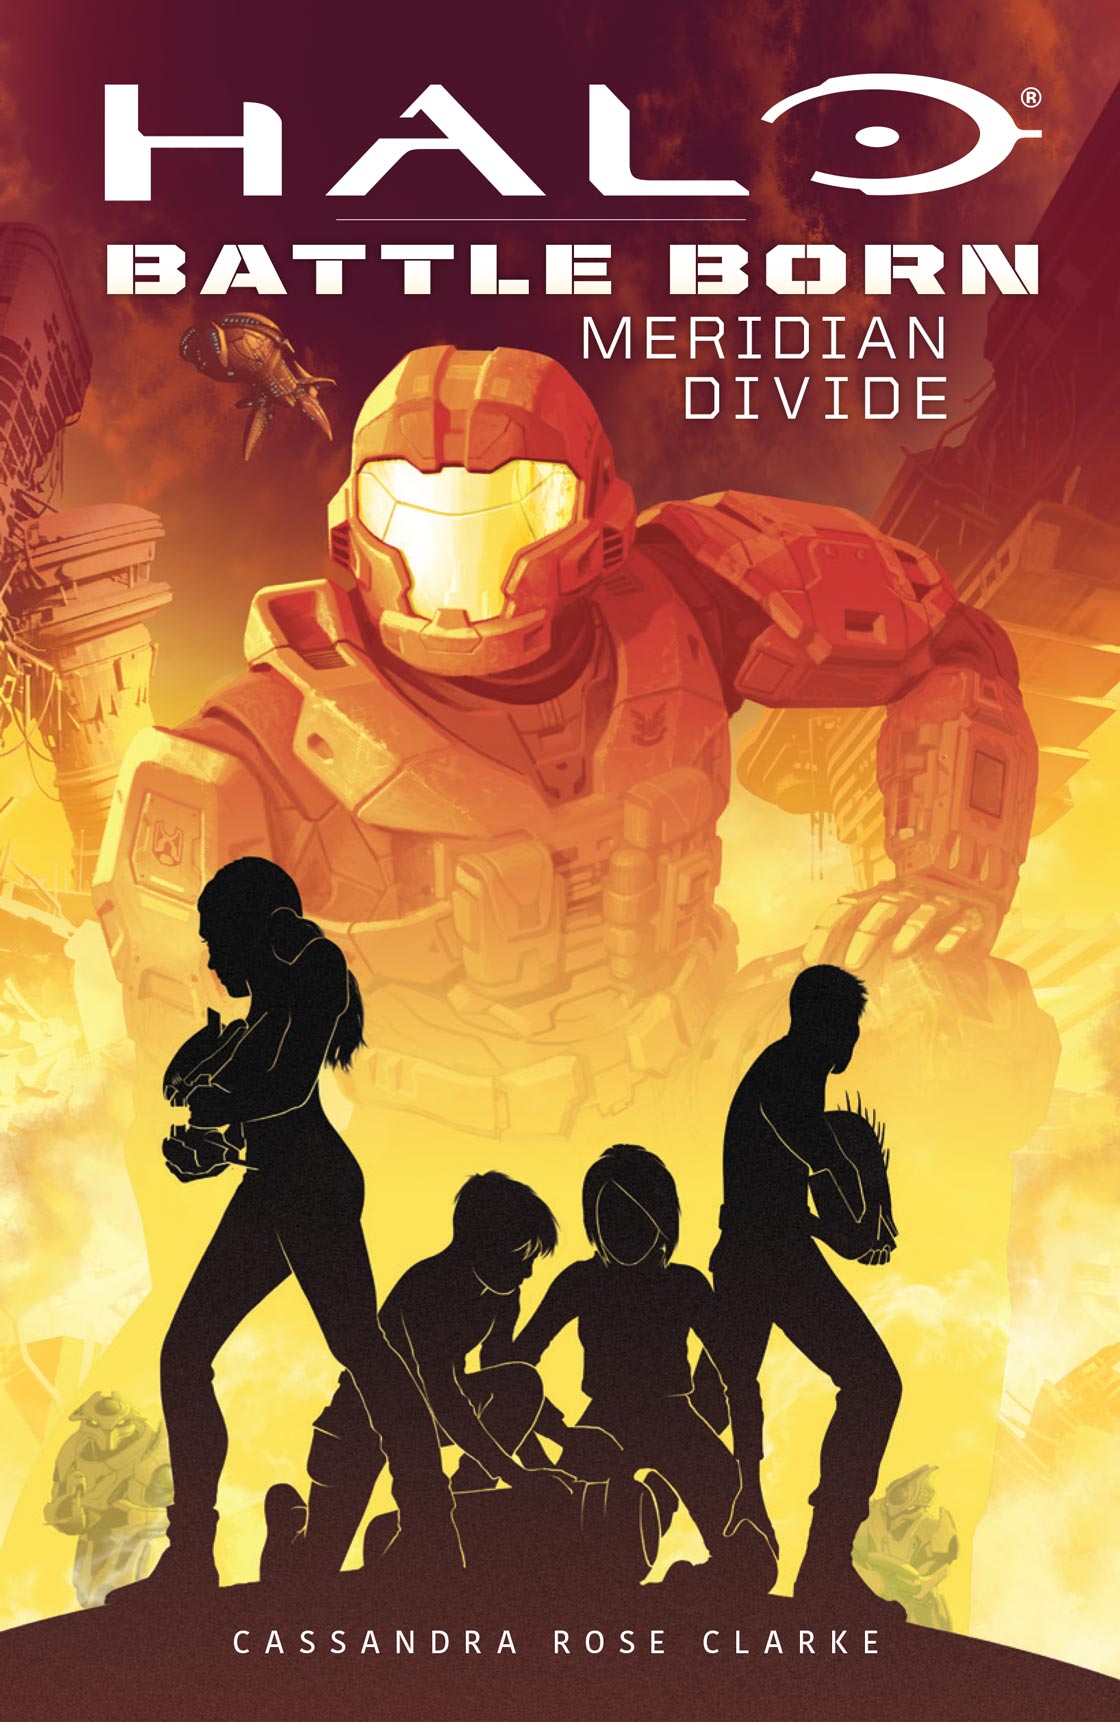 halo_meridian_divide_cover_waypoint-80ddd2a691ad4b759967cfeb907bea75.jpg